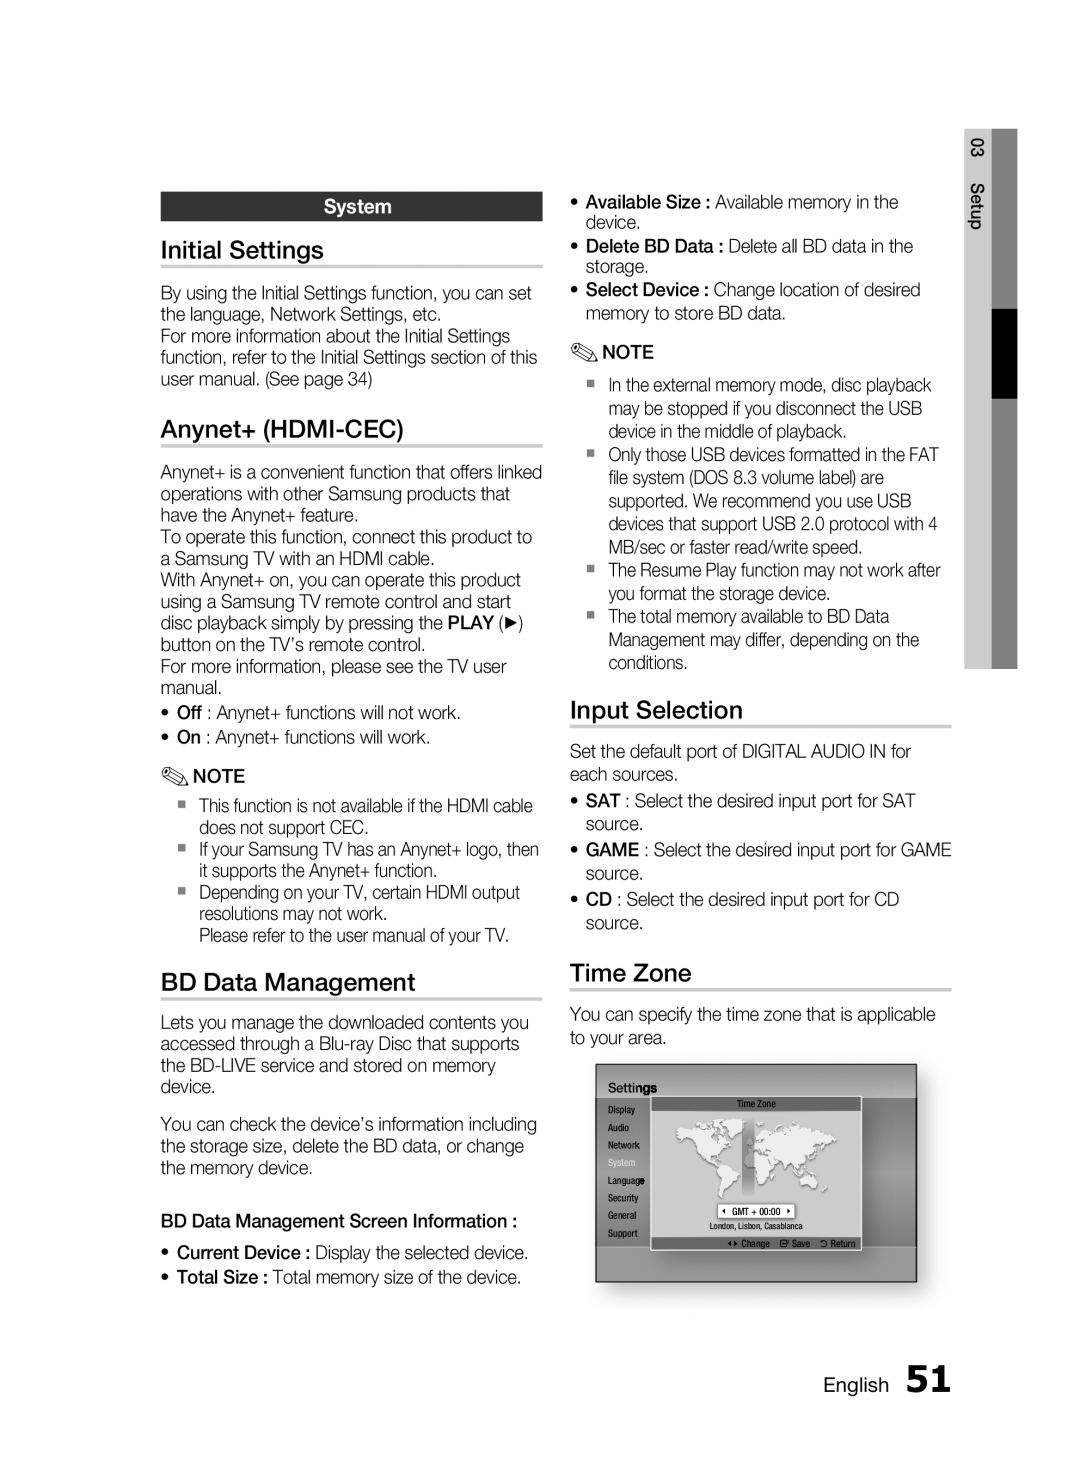 Samsung HW-D7000 user manual Initial Settings, Anynet+ HDMI-CEC, Input Selection, BD Data Management, Time Zone, System 